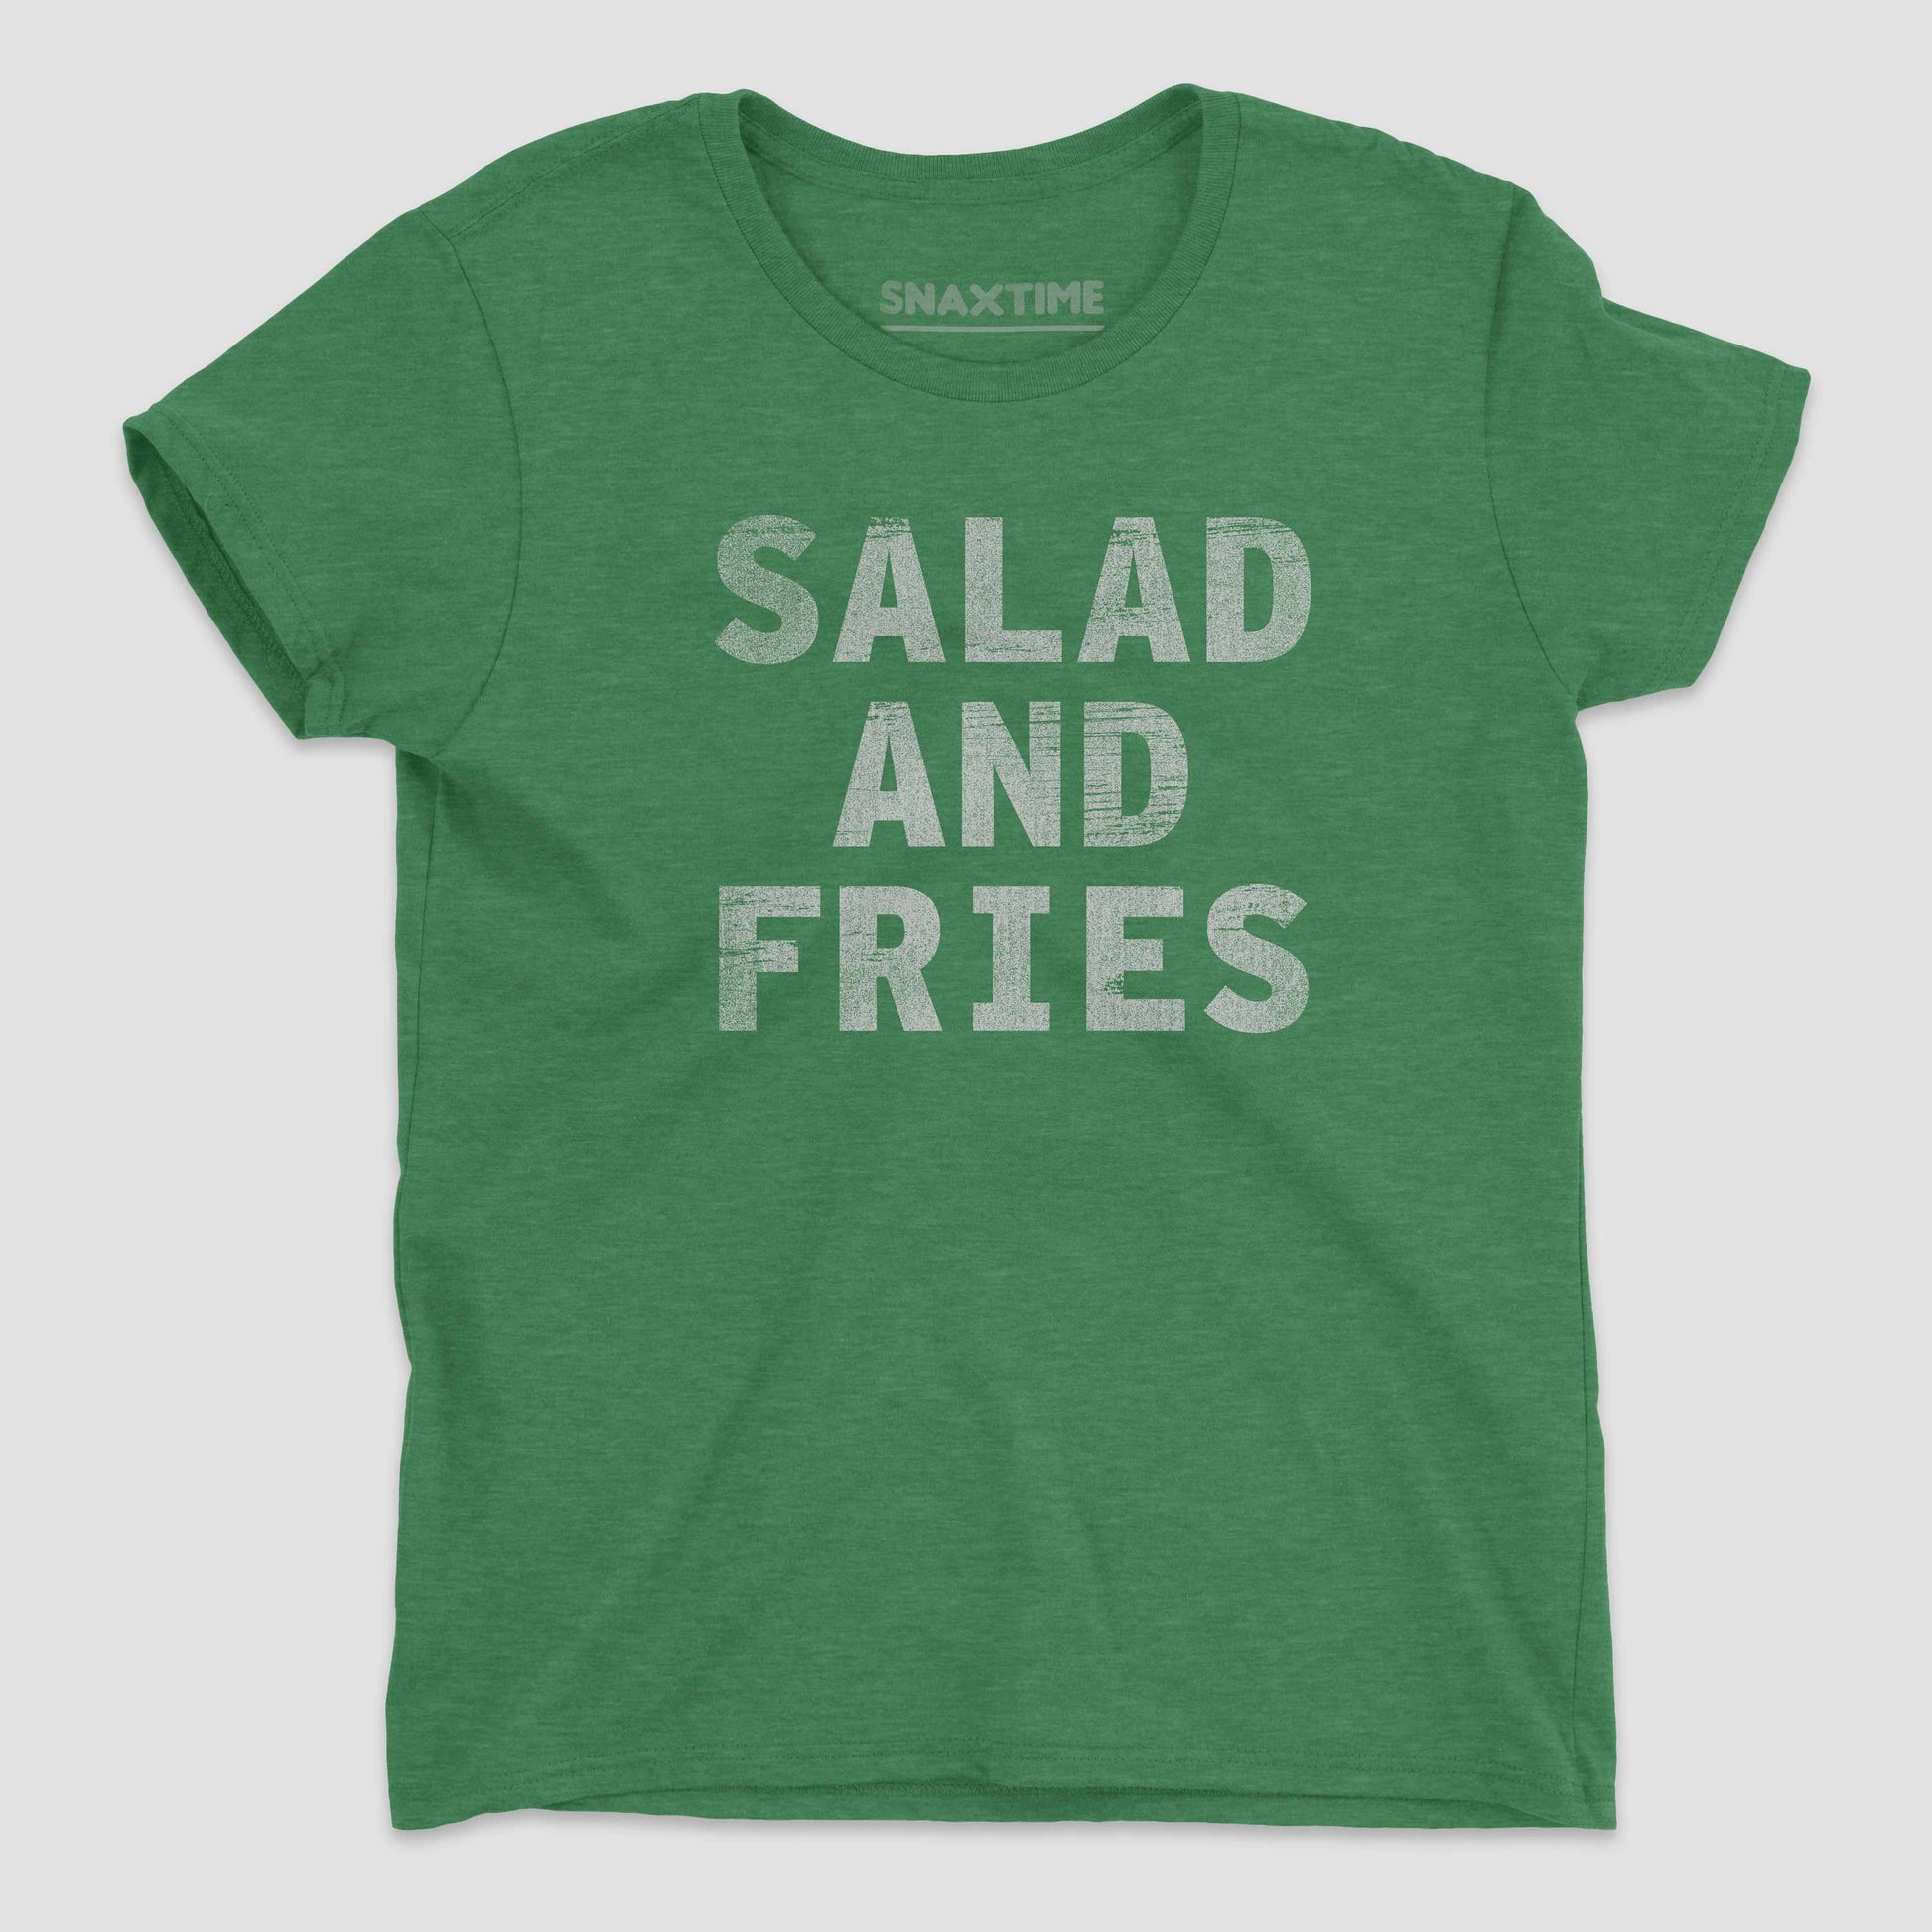 Heather Green Salad and Fries Women's Graphic T-Shirt by Snaxtime